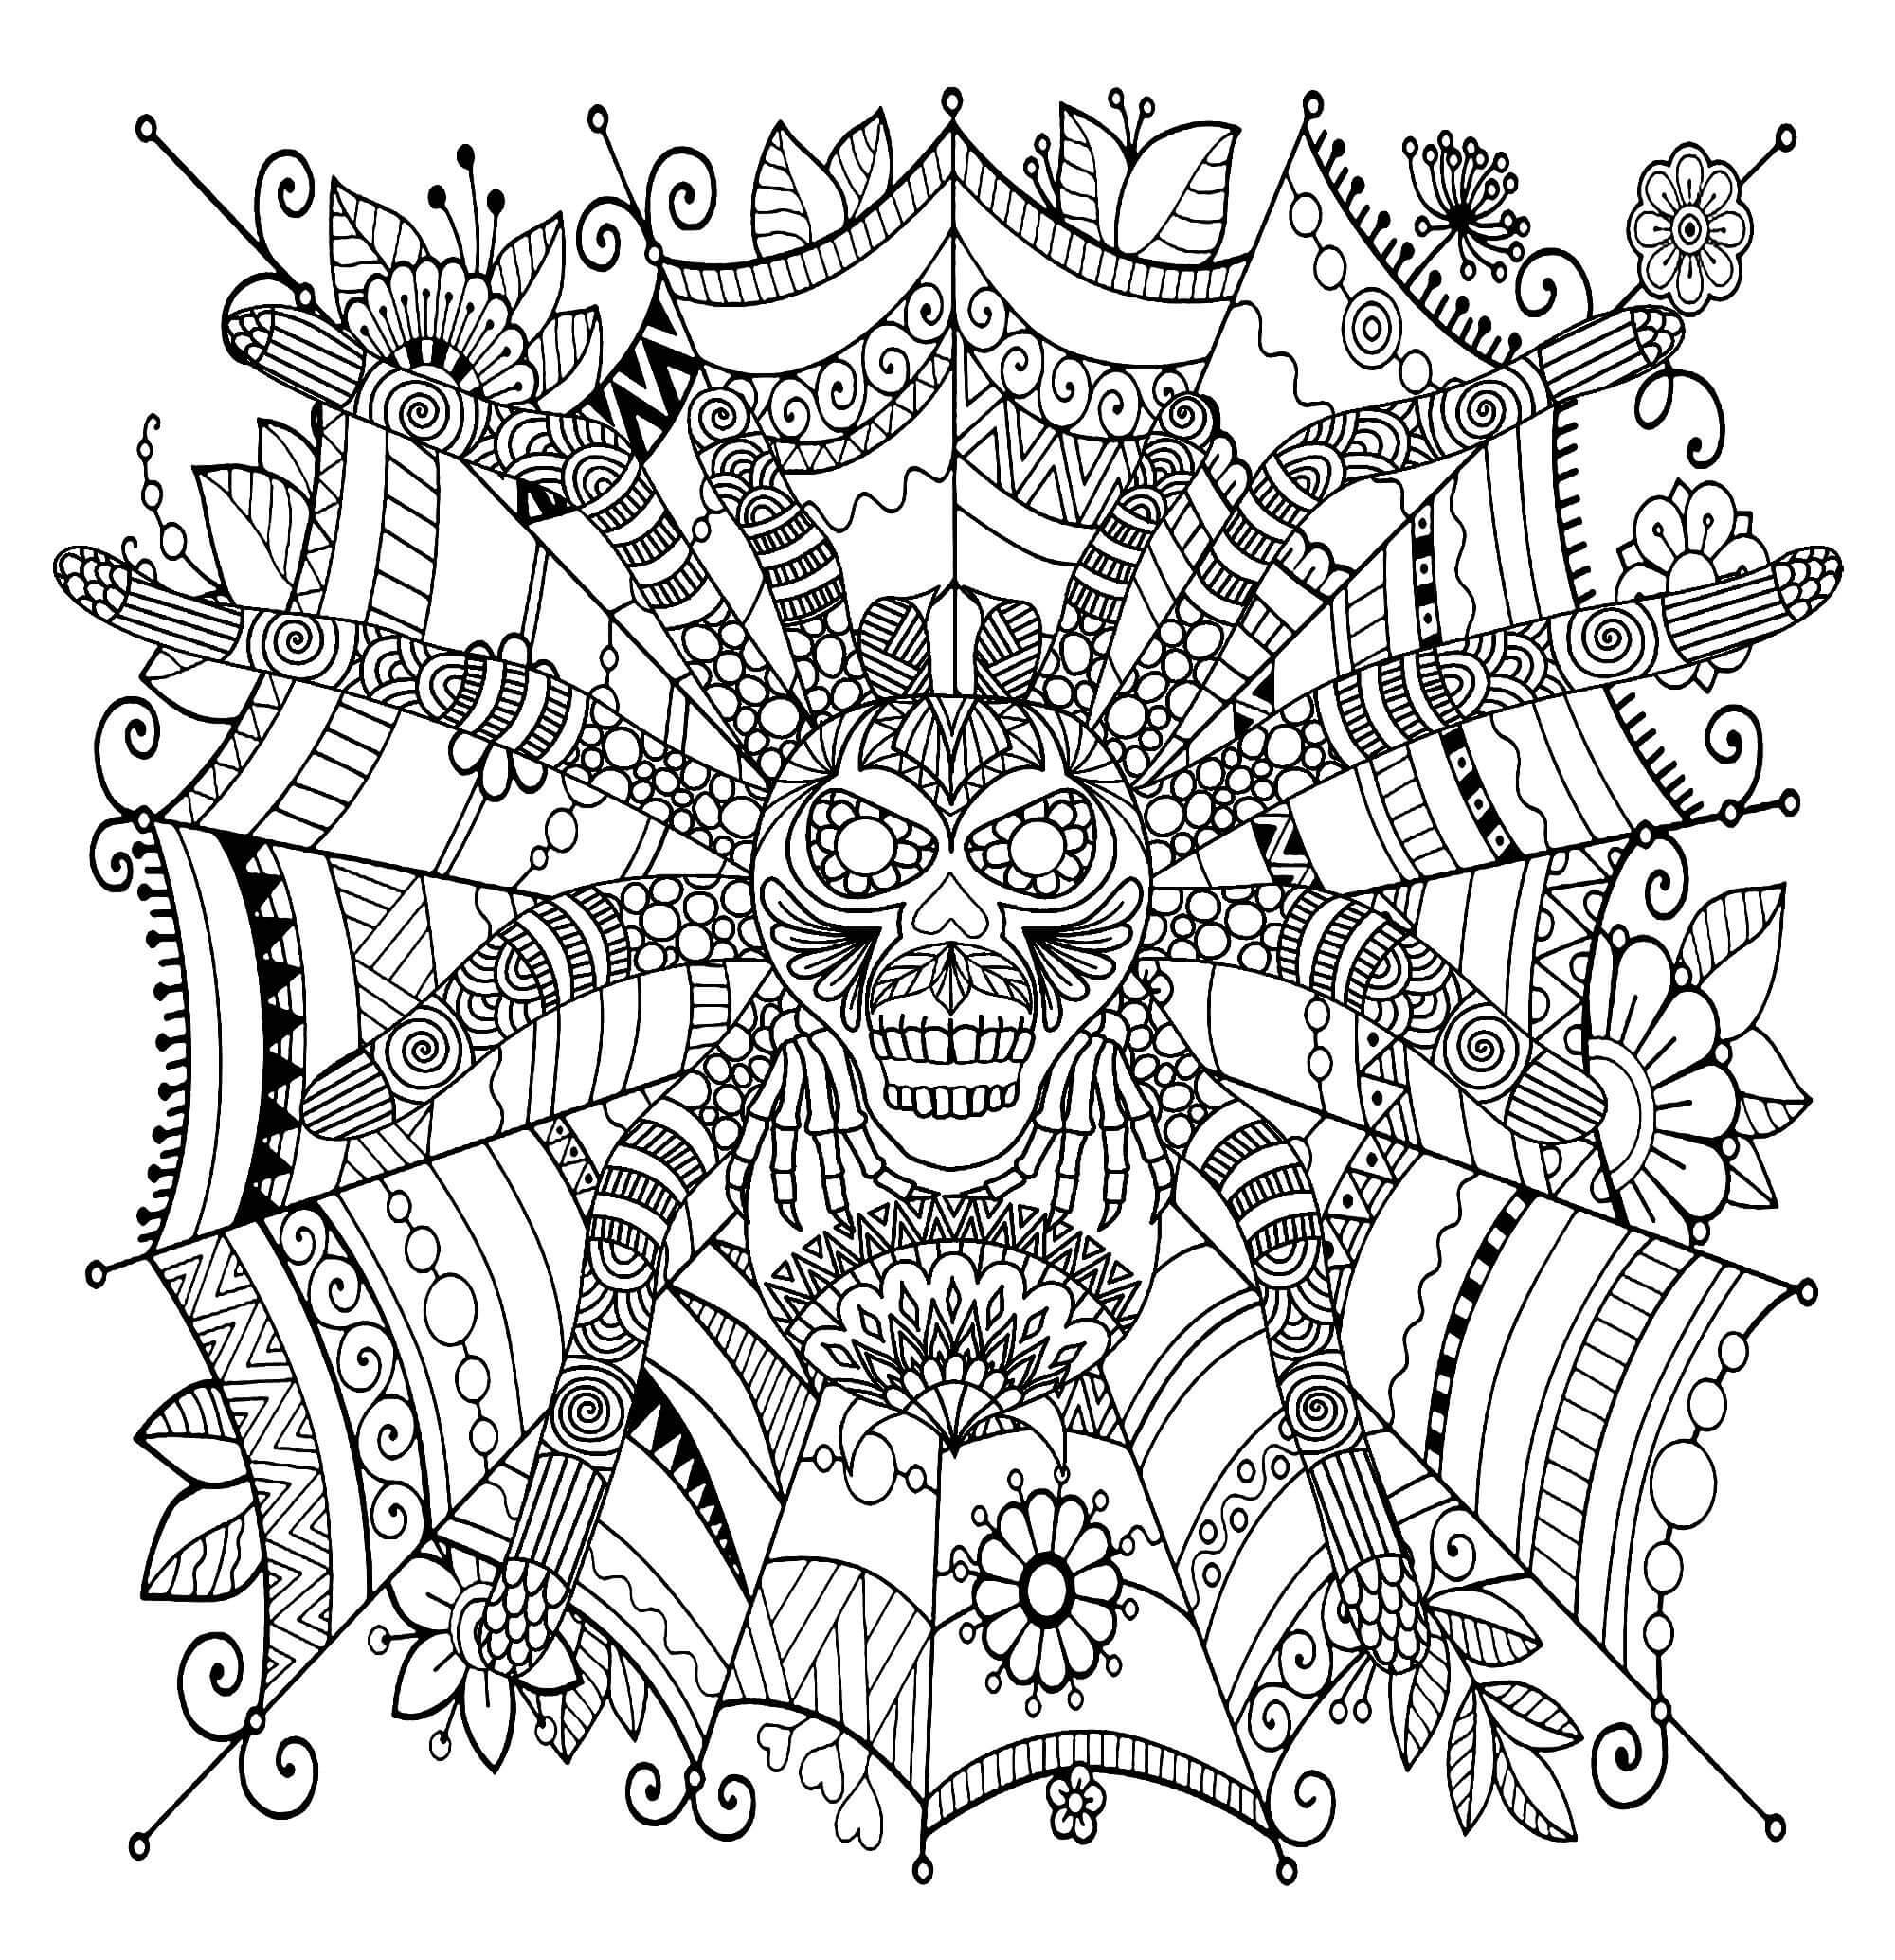 Mandala Big Spider With Flower and Leaves Coloring Page Mandalas